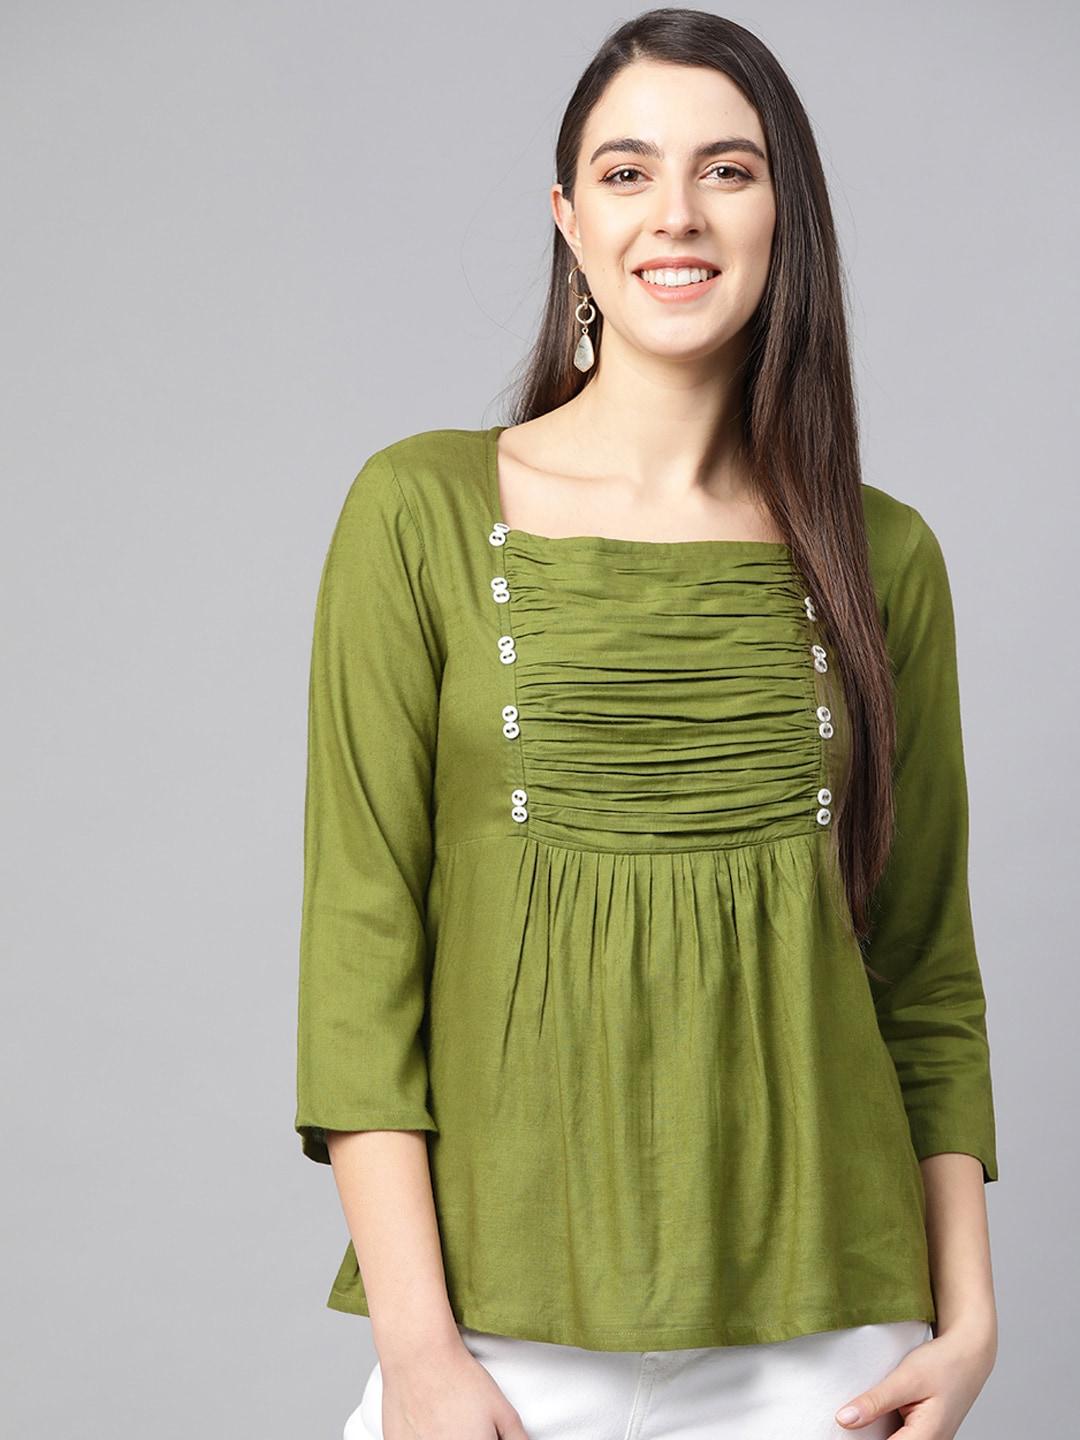 yash gallery women olive green pleated a-line top